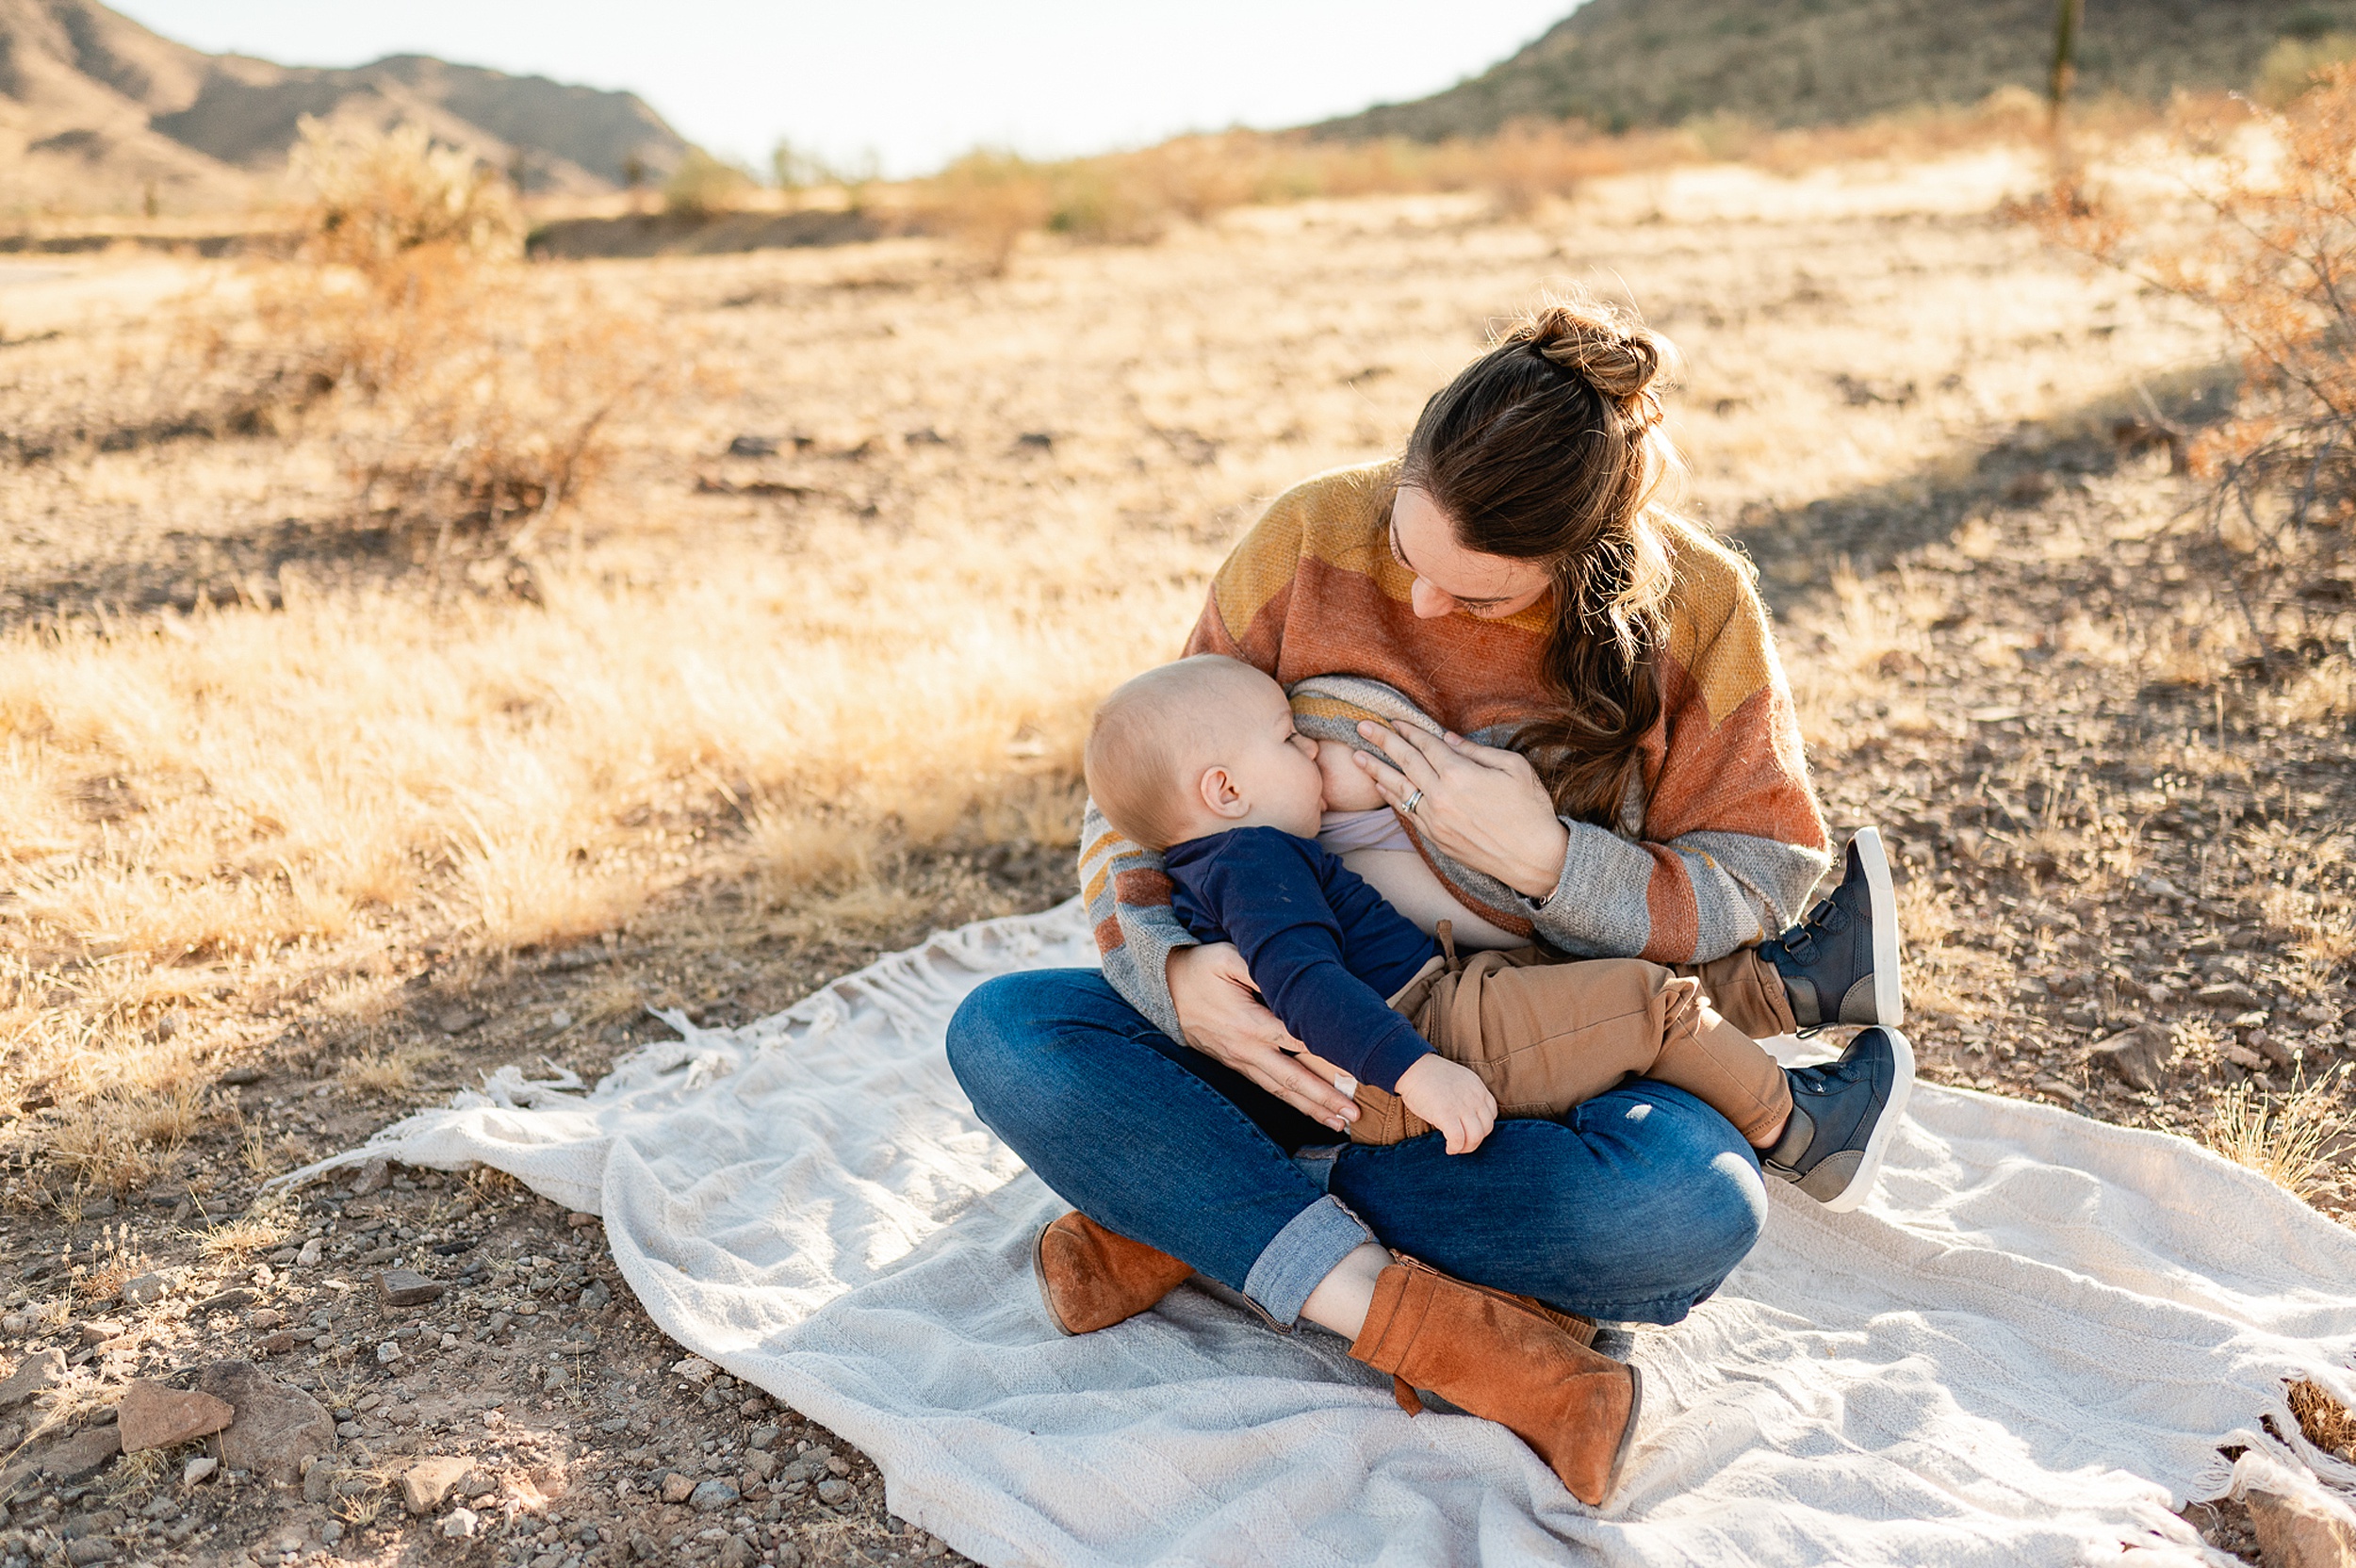 A mother breastfeeds her toddler son while sitting on a picnic blanket in a desert park